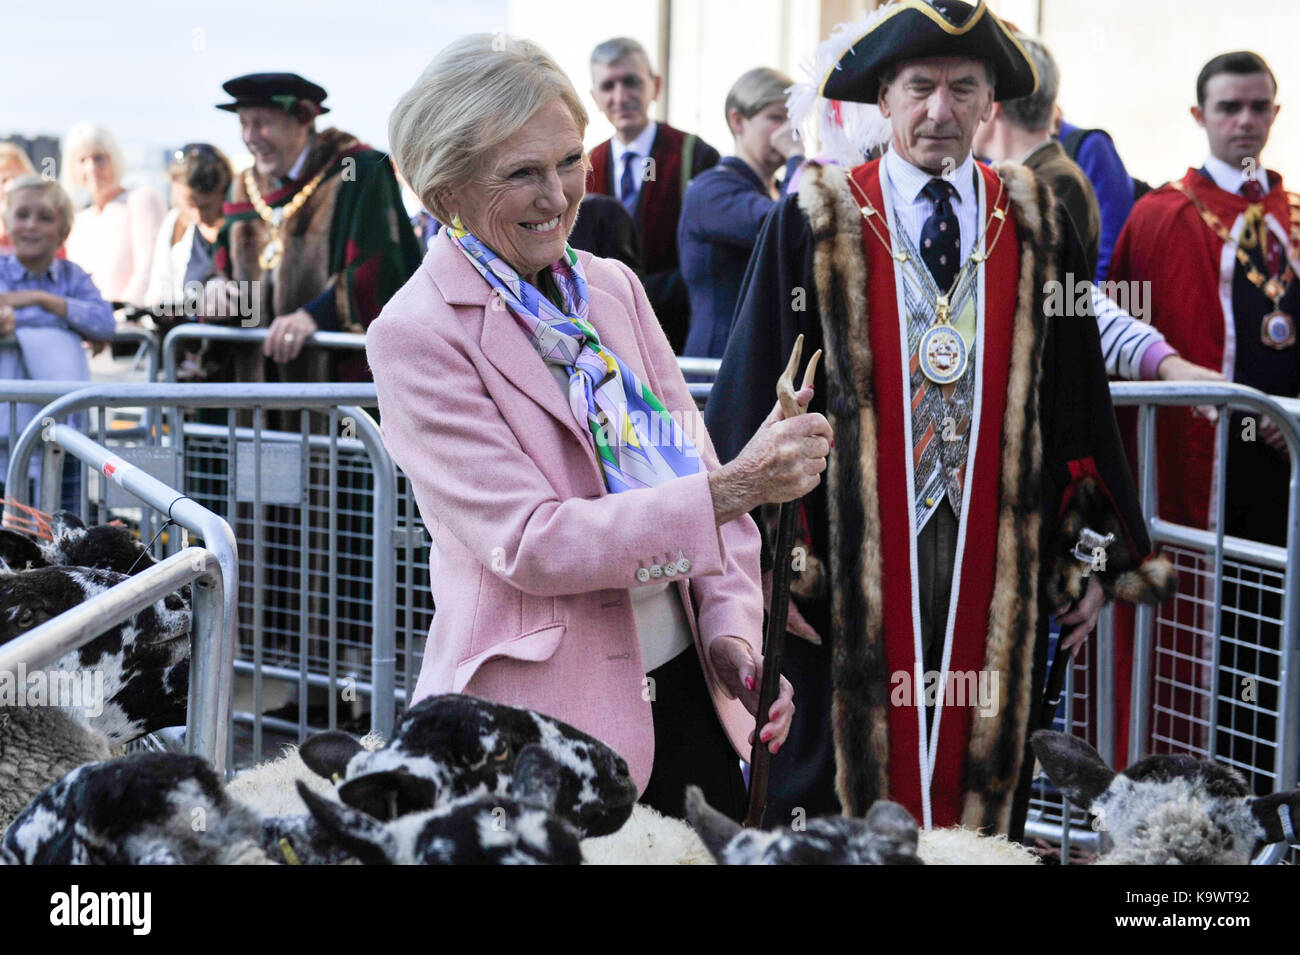 London, UK.  24 September 2017.  Mary Berry, celebrity TV baker and chef, leads the annual Sheep Drive of the Worshipful Company of Woolmen across London Bridge ahead of being made a Freeman of the City of London.  The event raises funds for the Lord Mayor's Appeal and the Woolmen's Charitable Trust. Credit: Stephen Chung / Alamy Live News Stock Photo